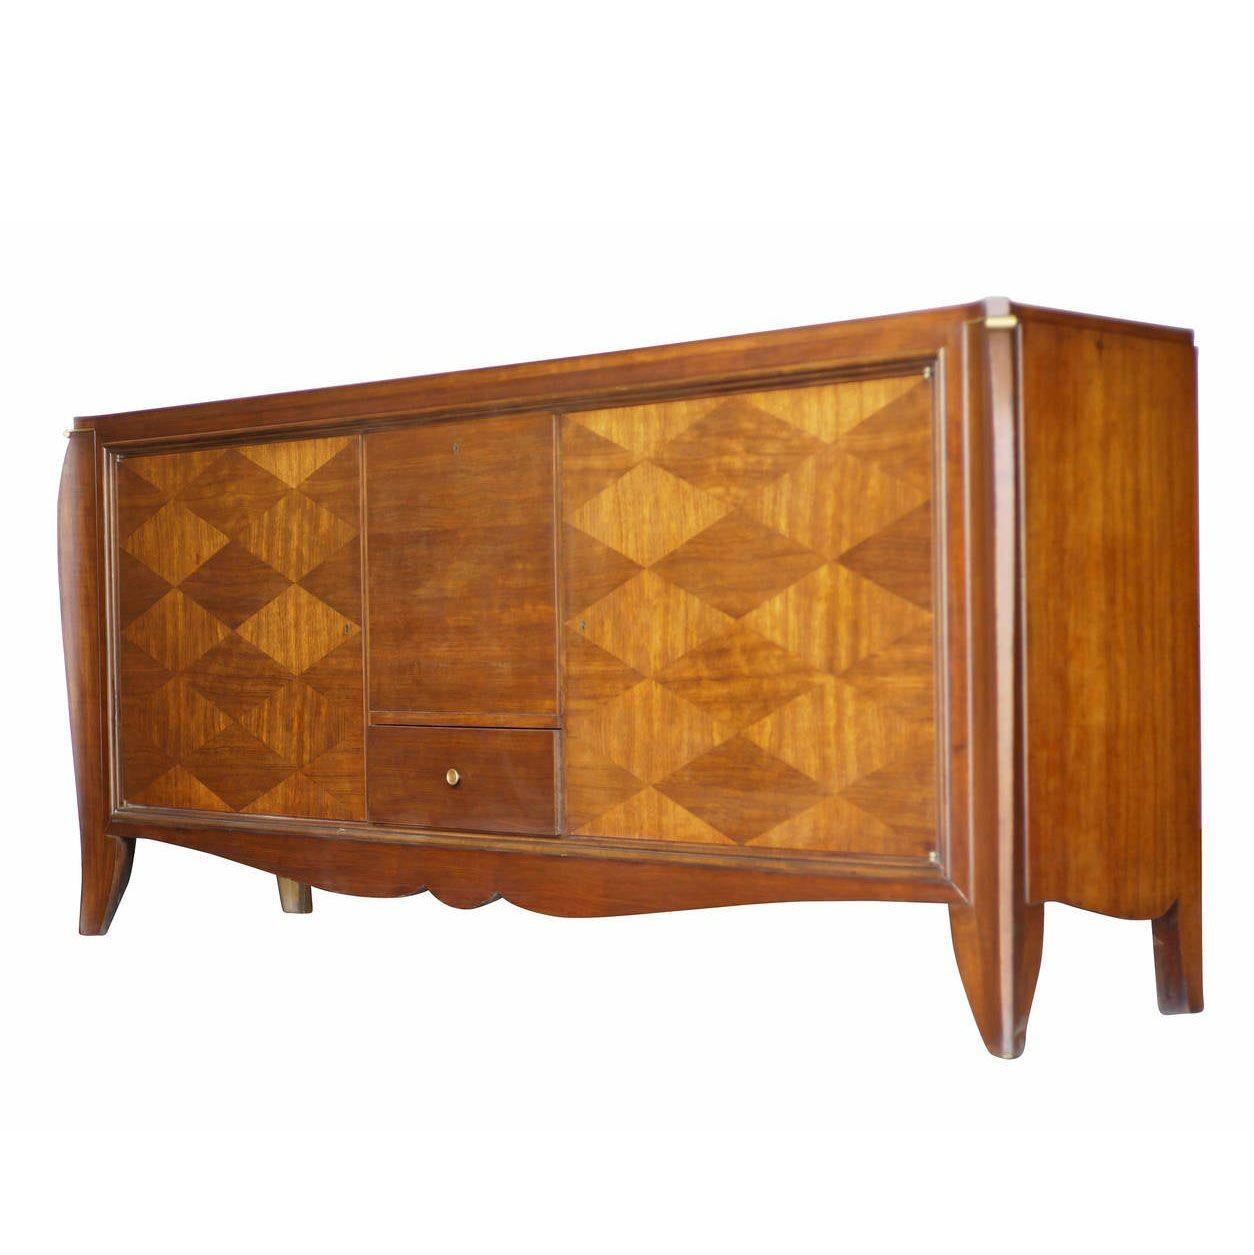 A beautiful French Art Deco Djo Bourgeois style sideboard with medium stain diamond pattern and wood inlay with elegantly tapered legs. The sideboard features 3 storage cabinets and a single pullout / pull-out drawer in the center each with hand